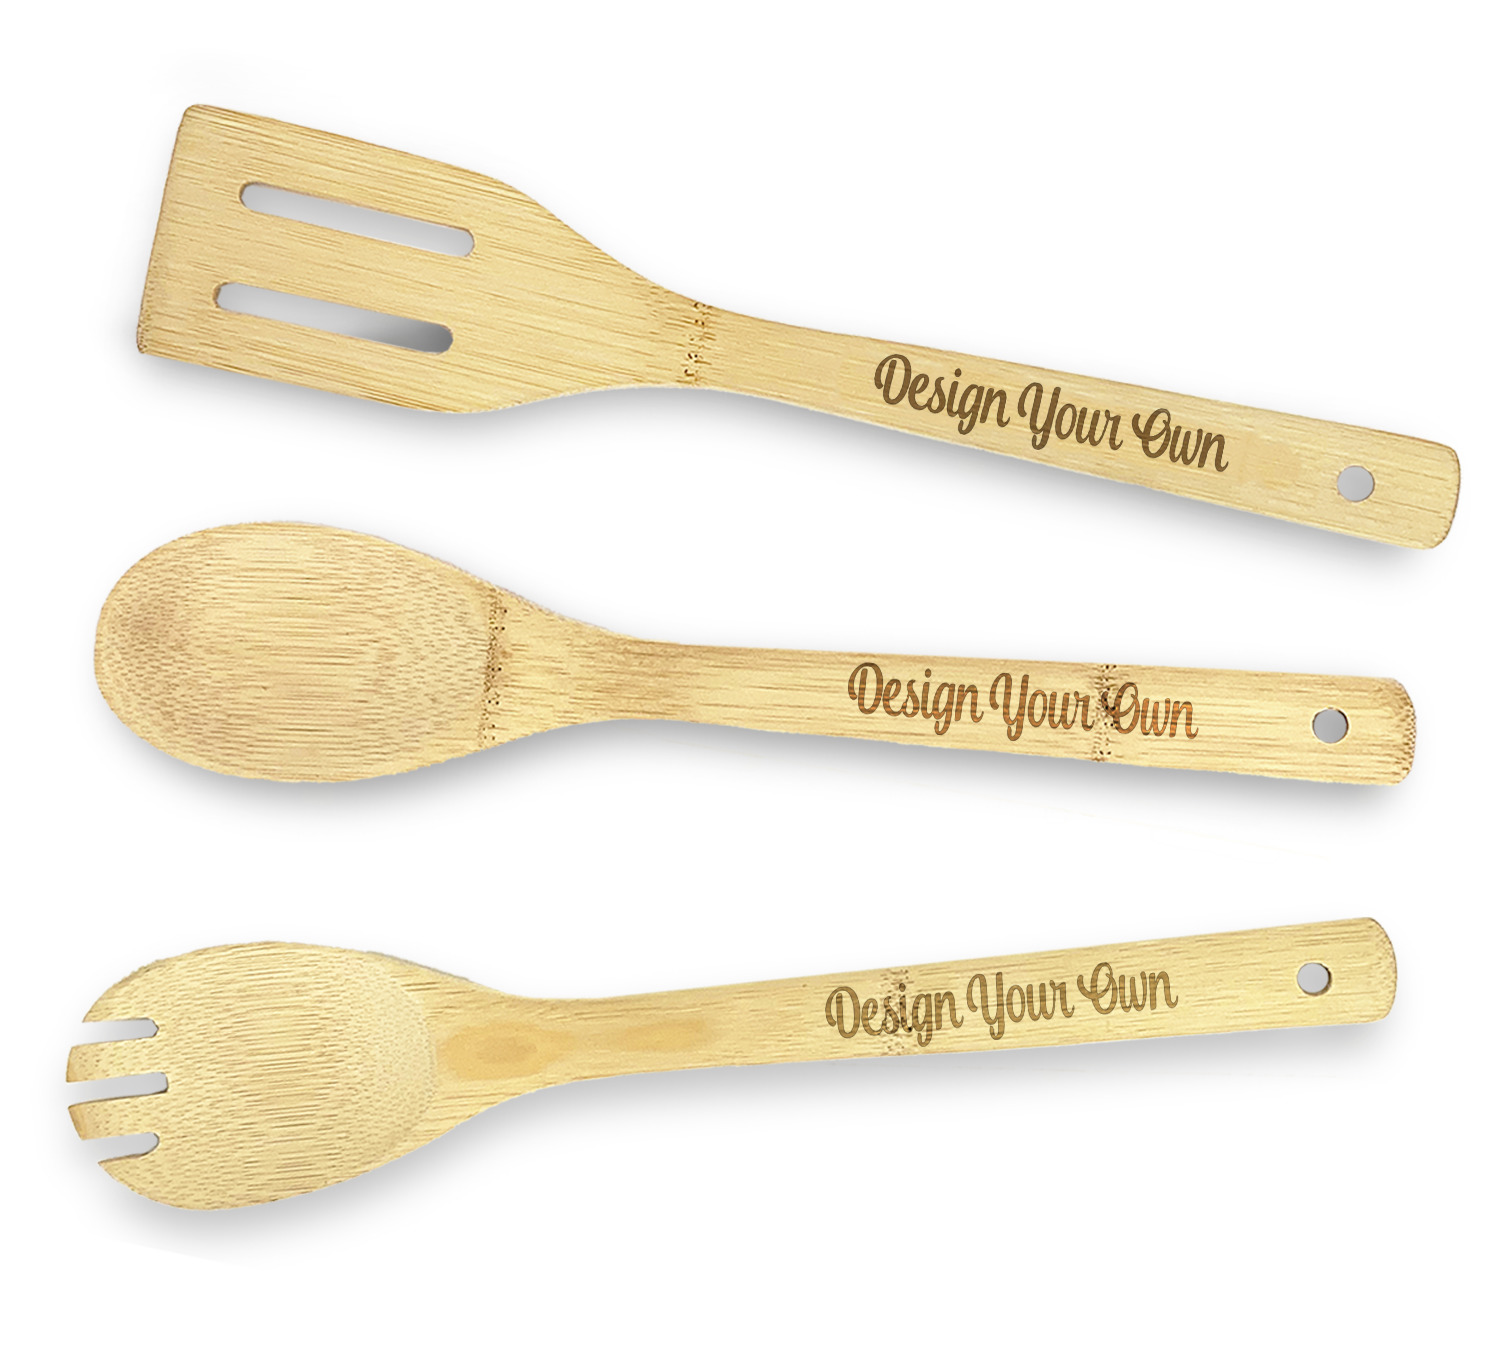 https://www.youcustomizeit.com/common/MAKE/965833/Design-Your-Own-Bamboo-Cooking-Utensils-Set-Single-Sided-FRONT.jpg?lm=1630345391